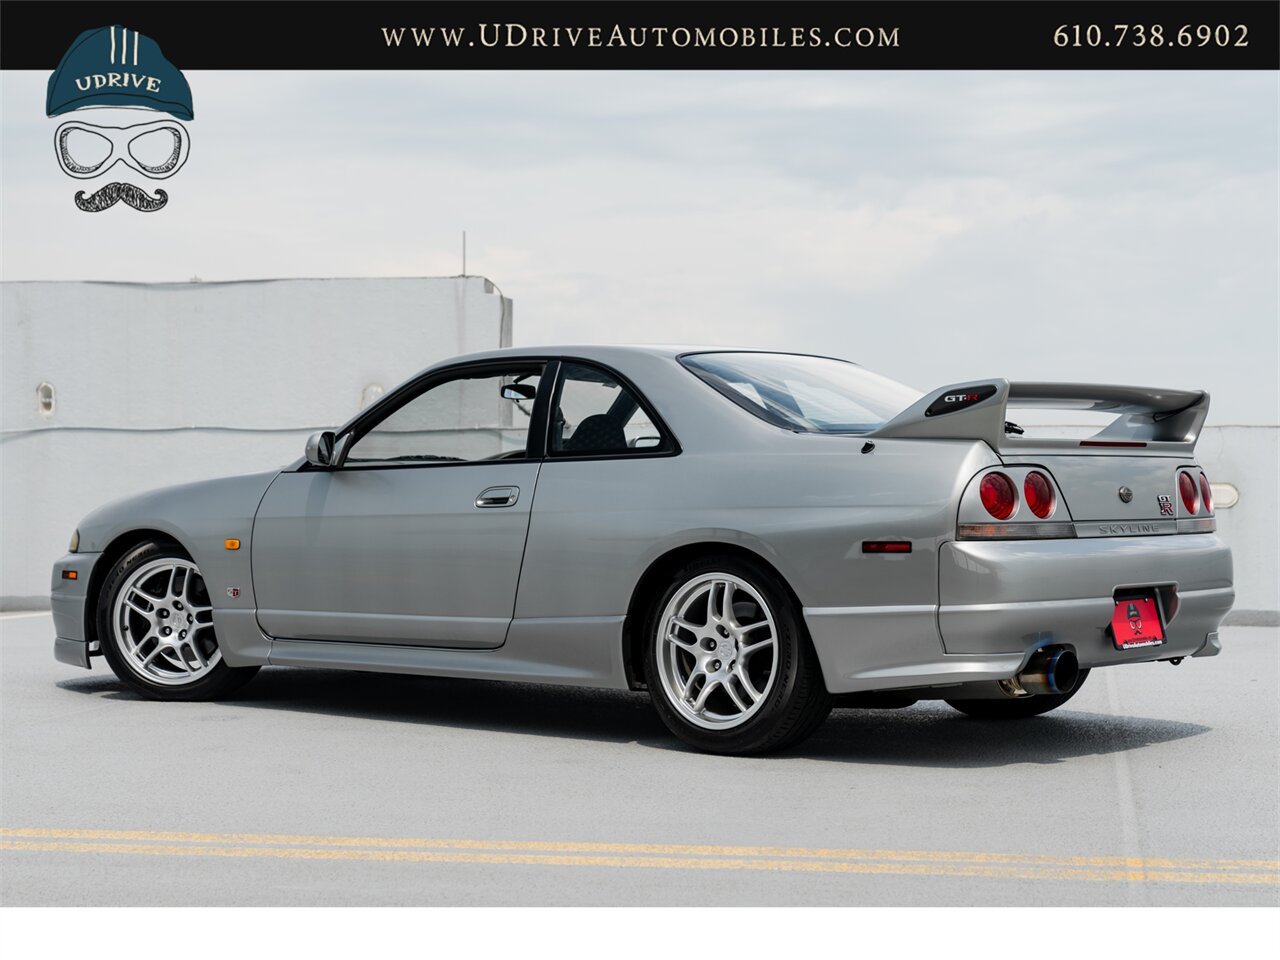 1997 Nissan Skyline GT-R R33 28k Miles Collector Grade  Motorex Legally Imported Titled Federalized Service History - Photo 4 - West Chester, PA 19382